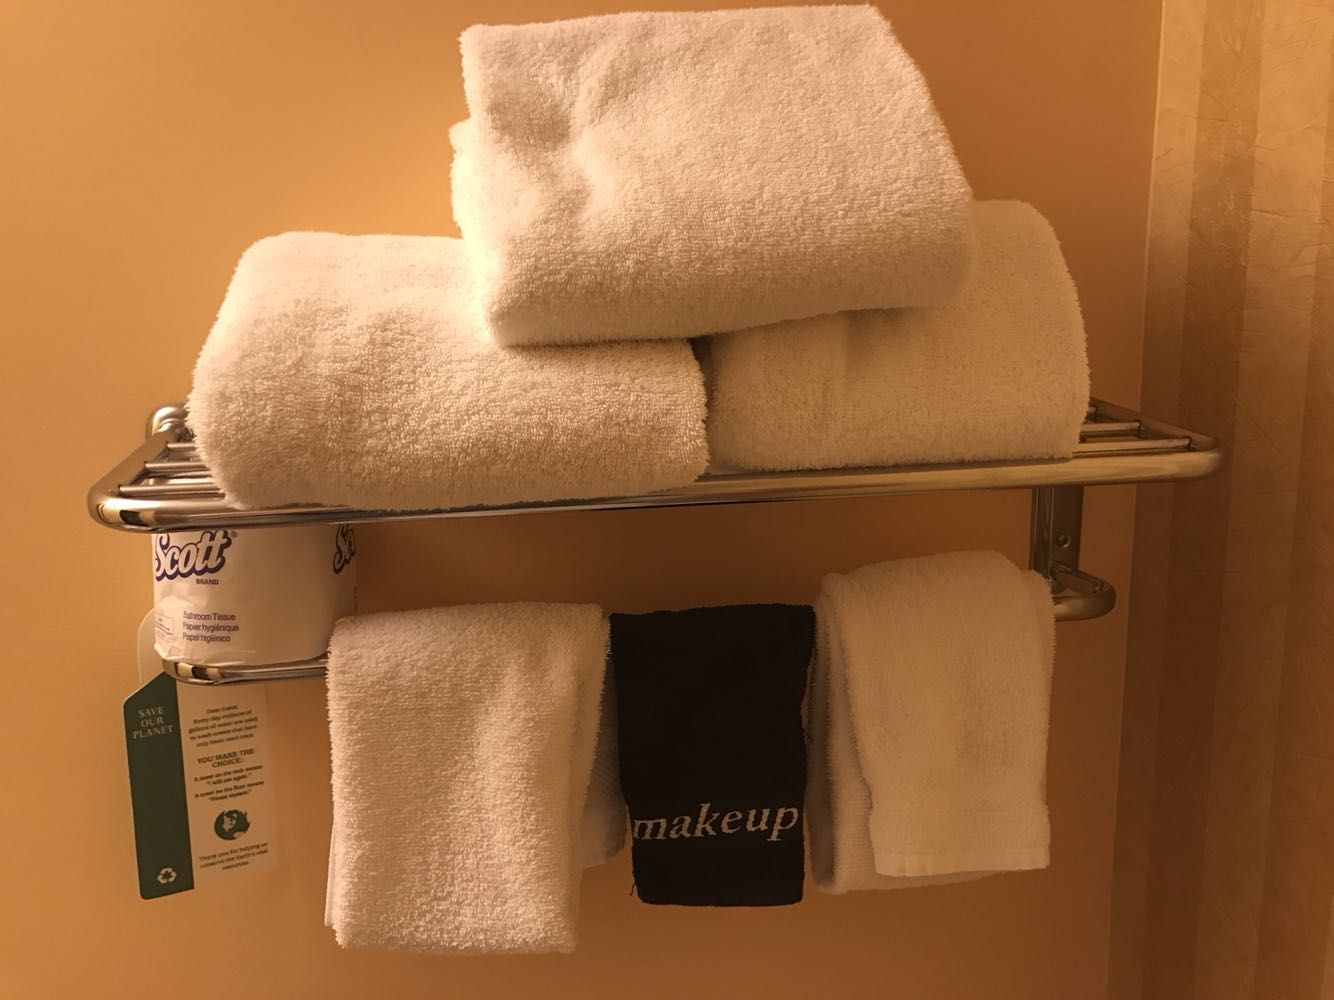 Hotel I'm staying at has a separate towel to take off makeup